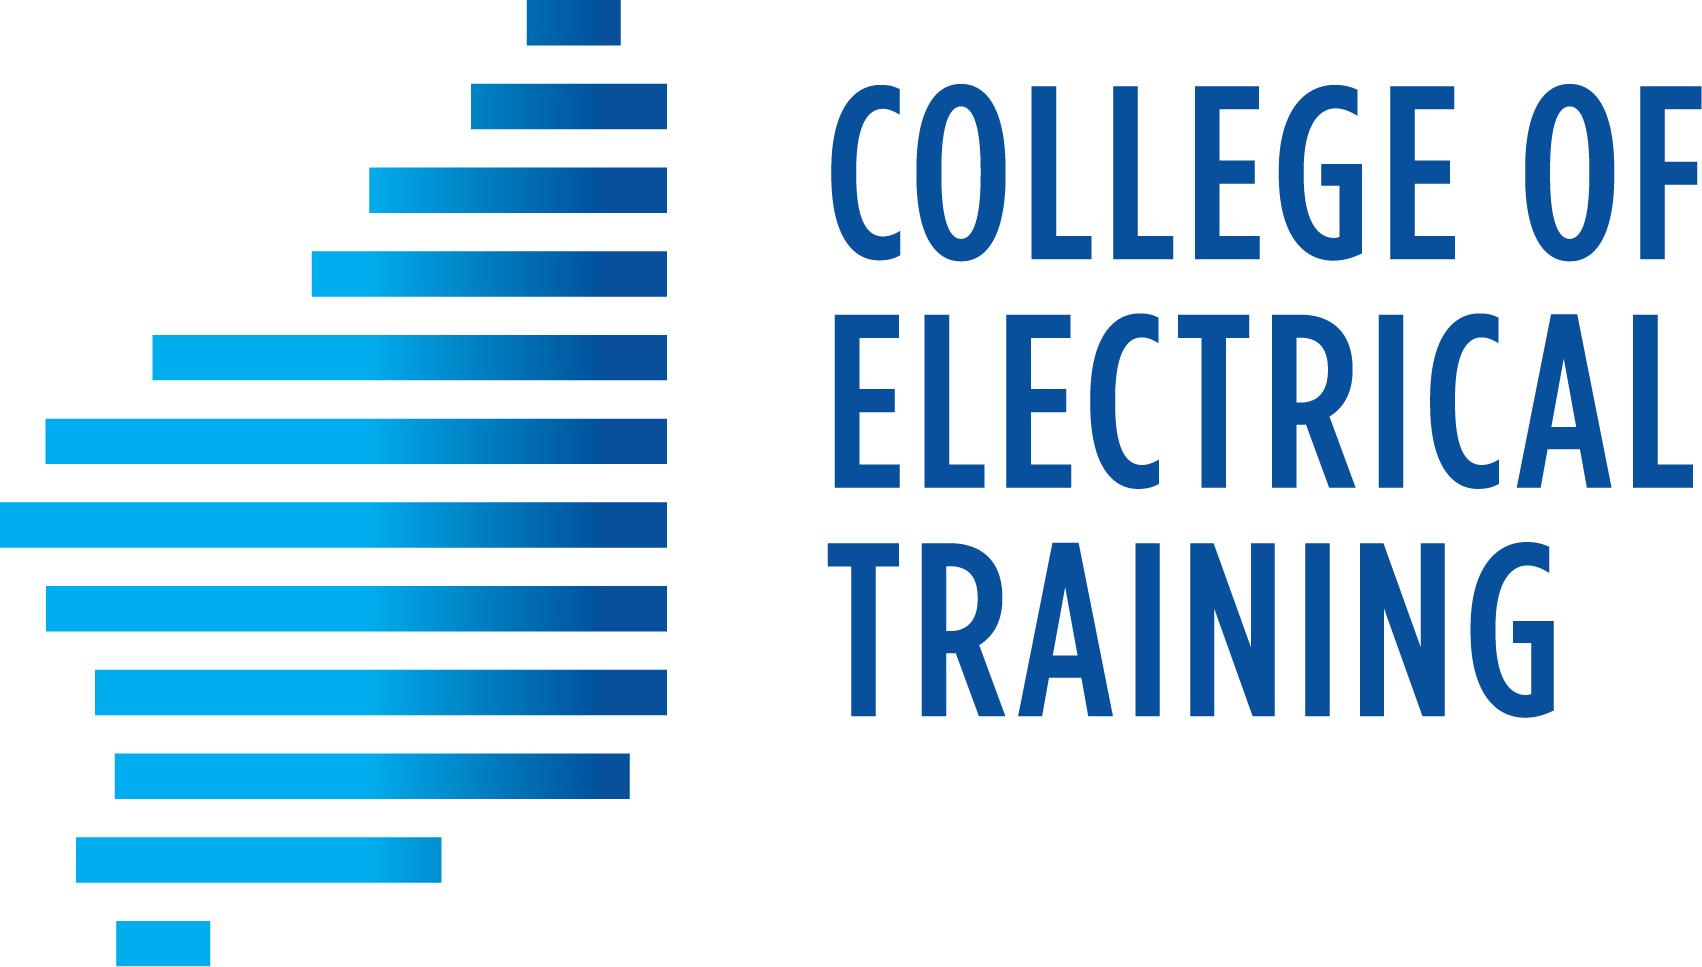 College of Electrical Training & Equip-Safe